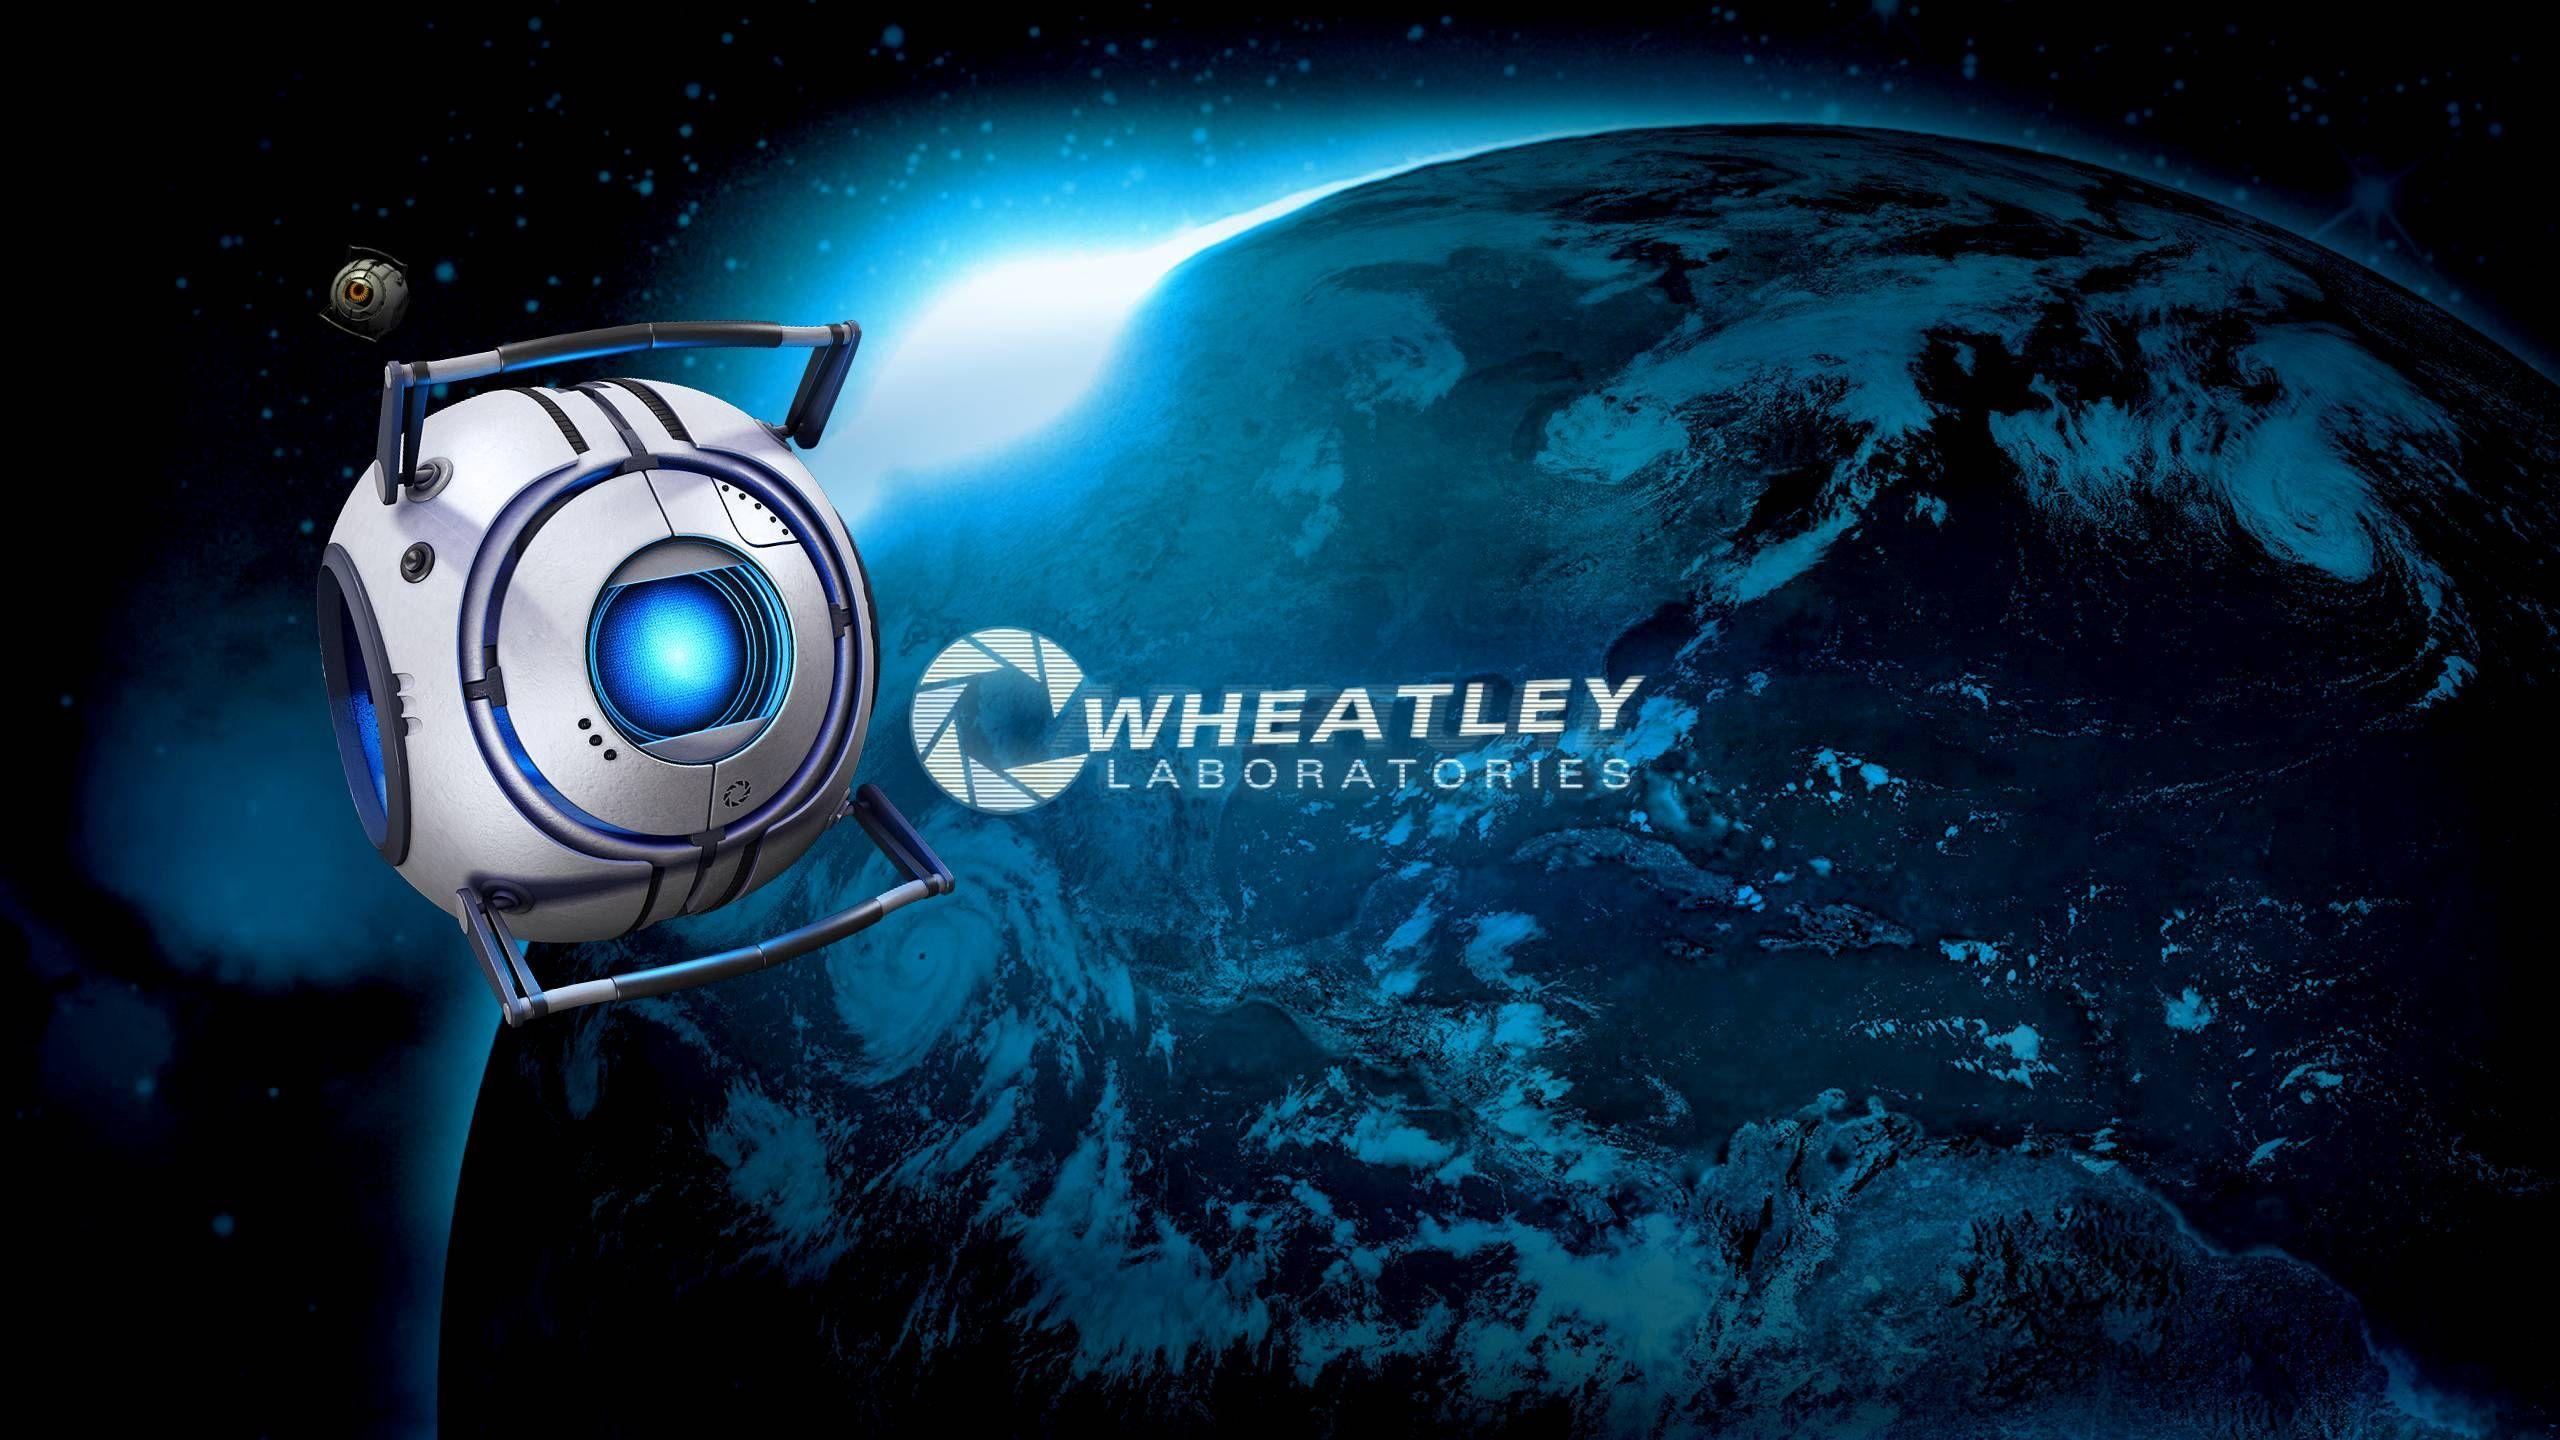 How To Portal 2 Ify Your Desktop With Animated Wallpaper. N4G